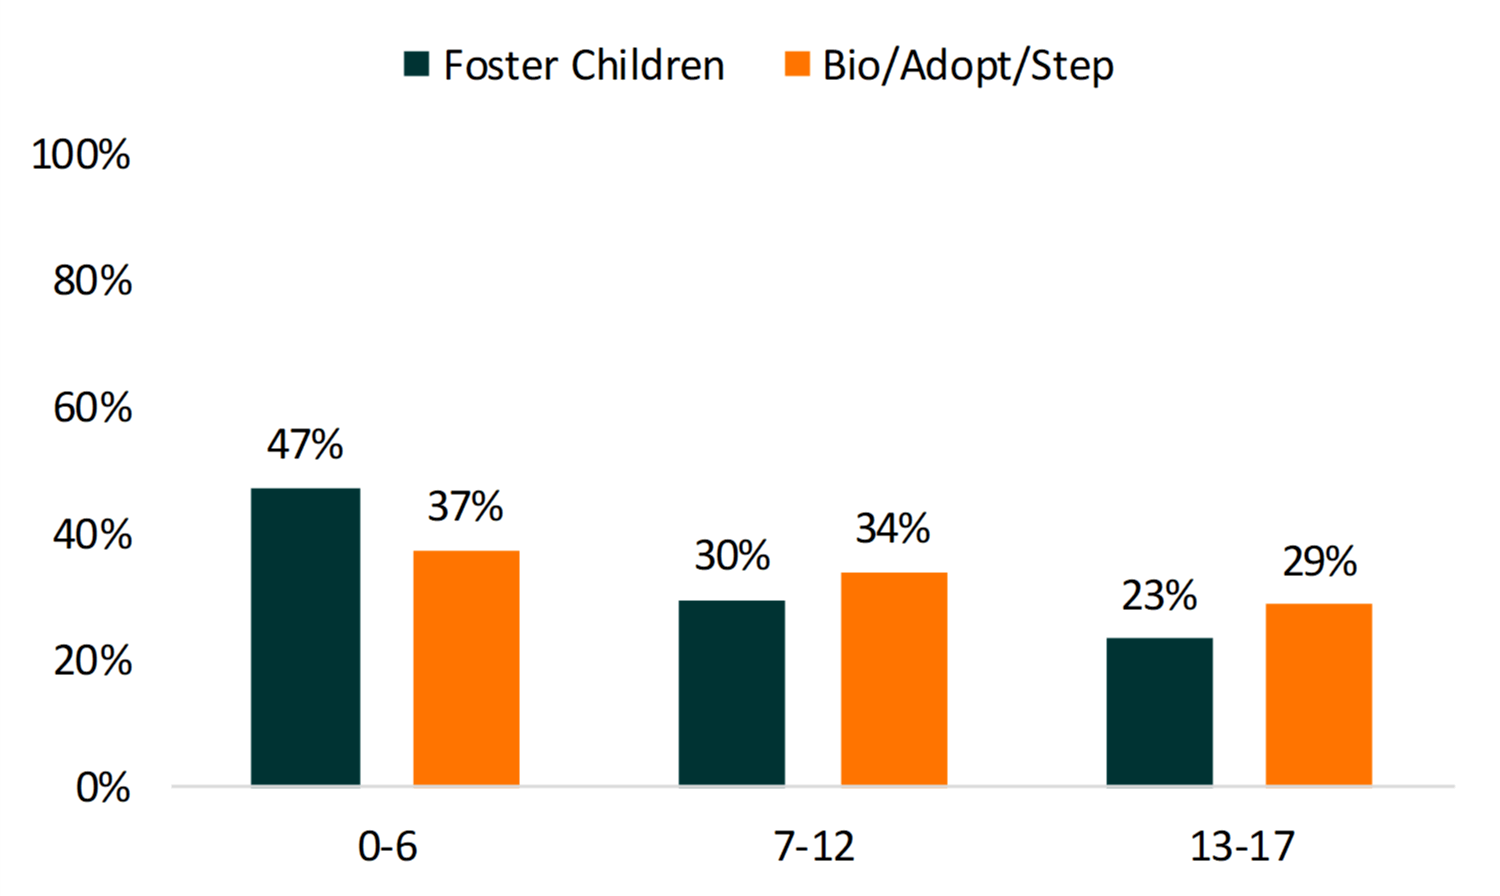 teal and orange bar chart showing Figure 2. Age of Foster Children and Biological/Adopted/Stepchildren, 2016-2018